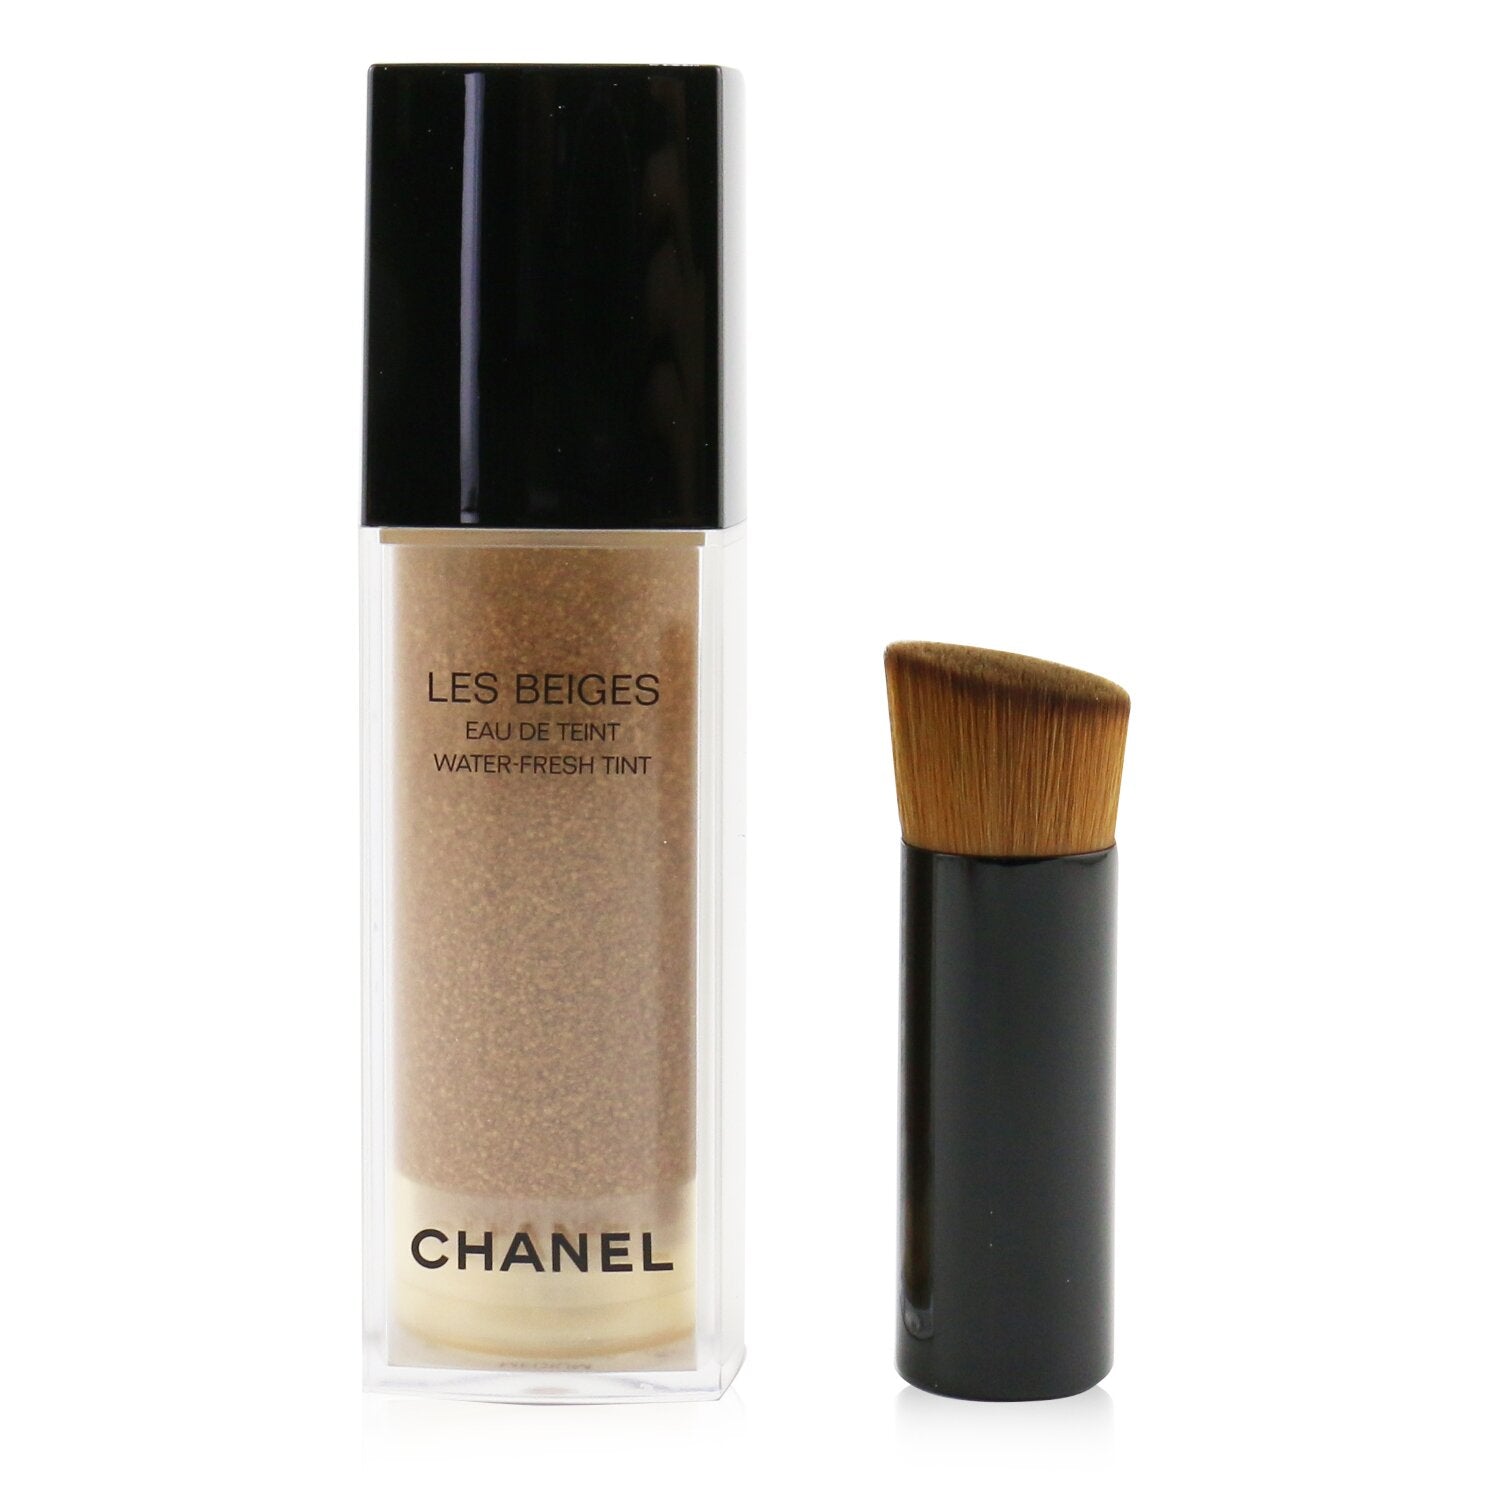 Chanel launches water-fresh tint foundation